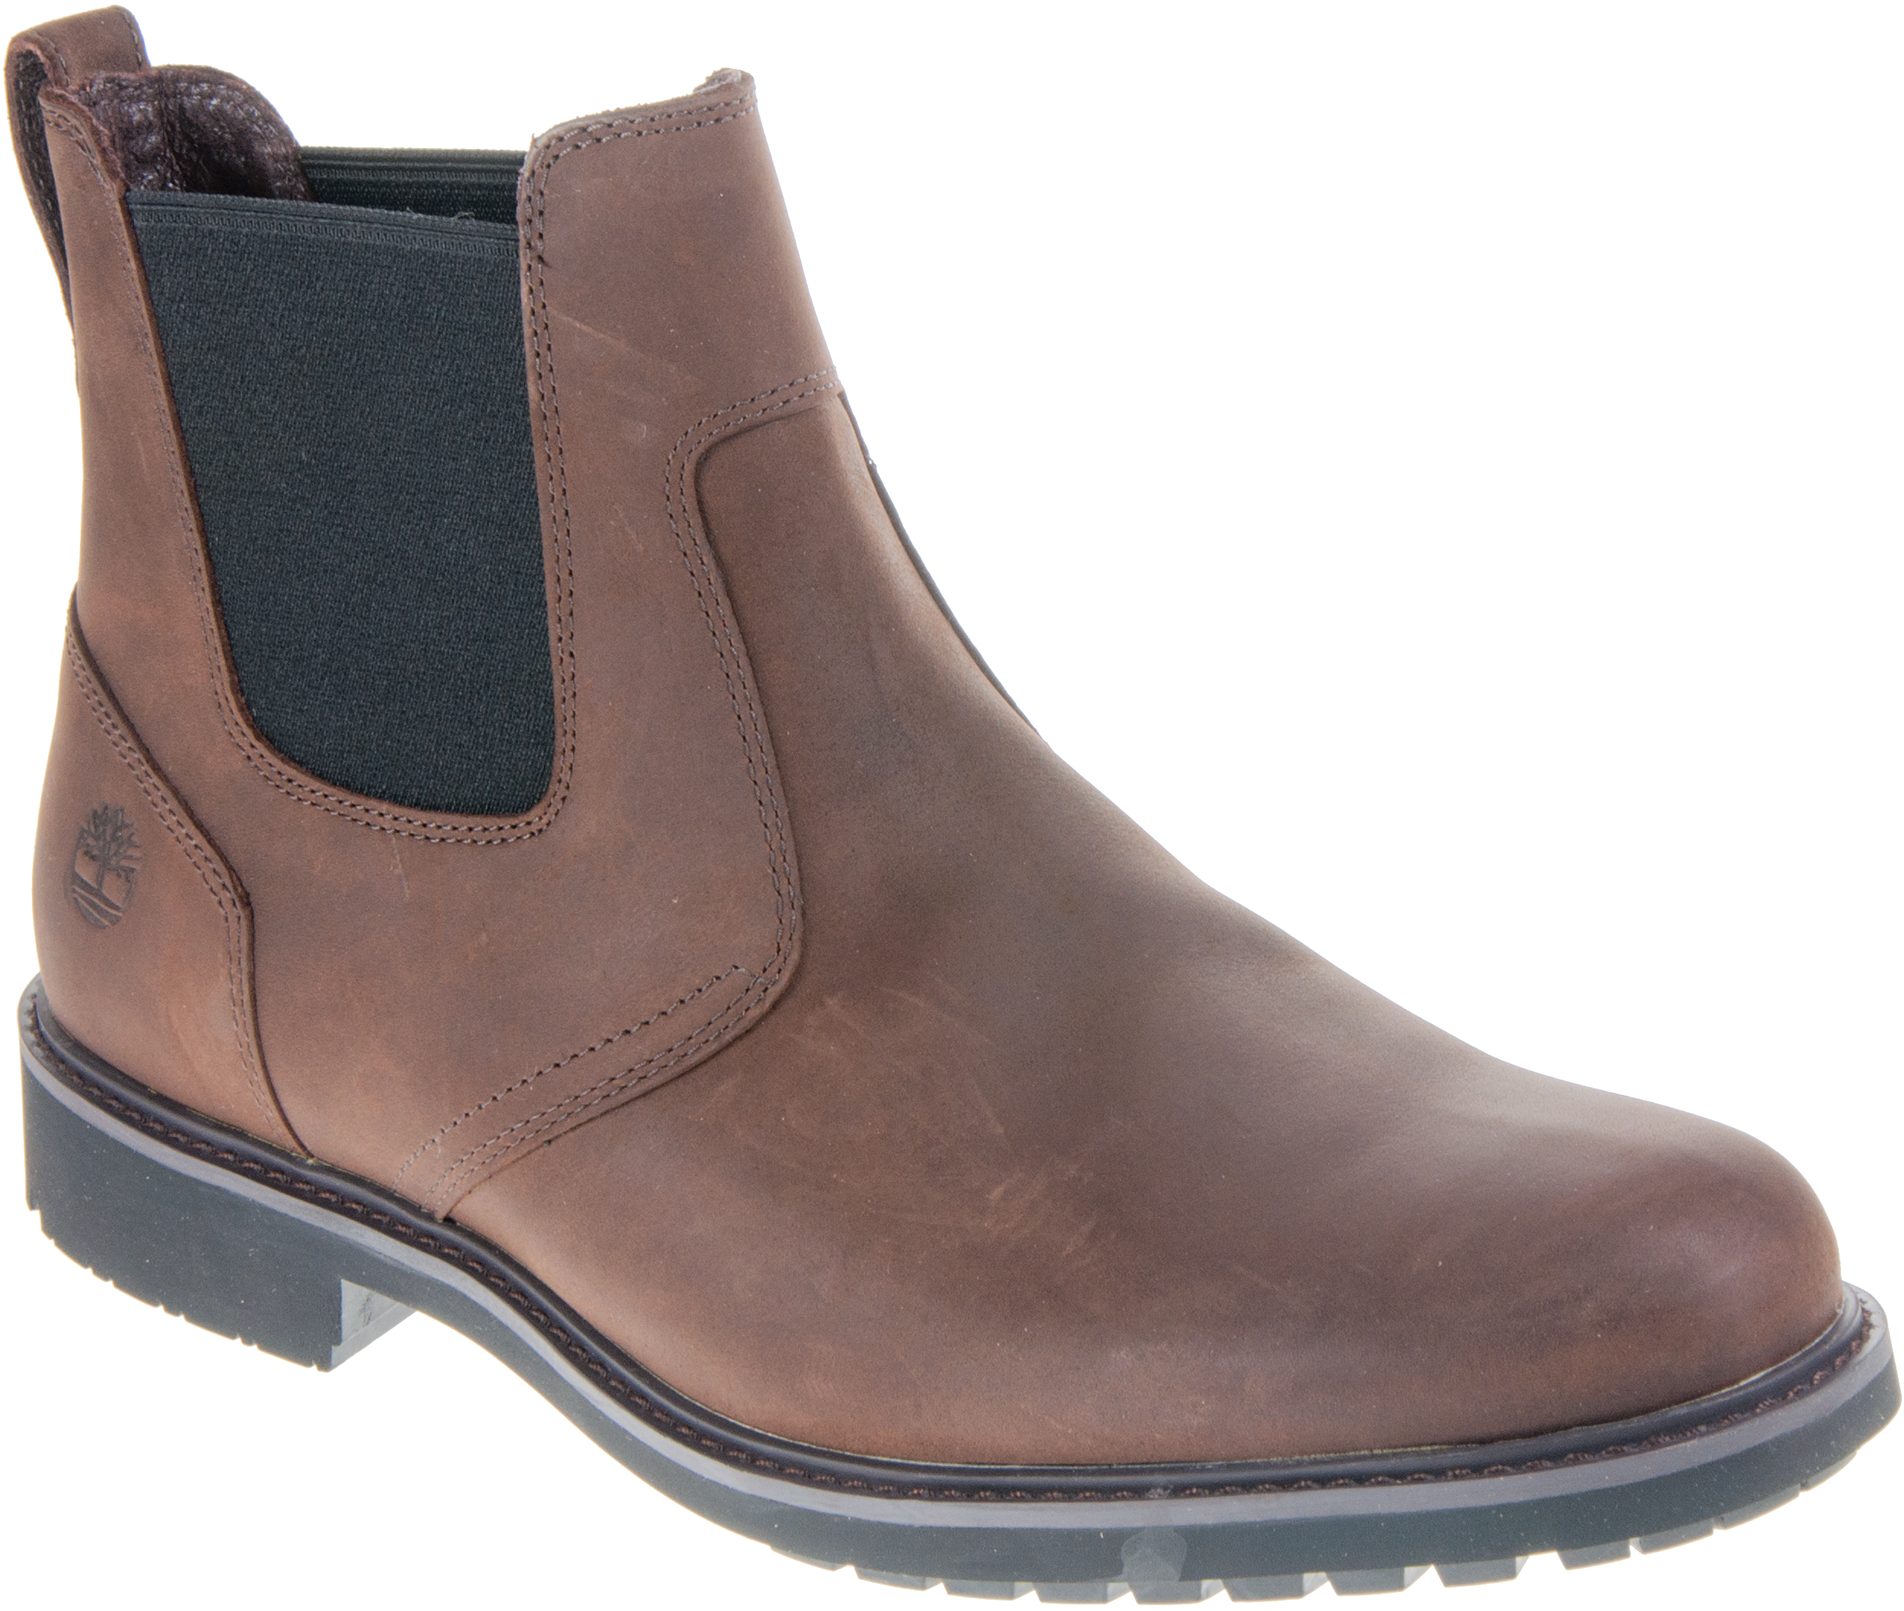 Timberland Stormbuck Chelsea Boot Waterproof Burnished Brown Oiled 5552R - Casual Boots - Humphries Shoes